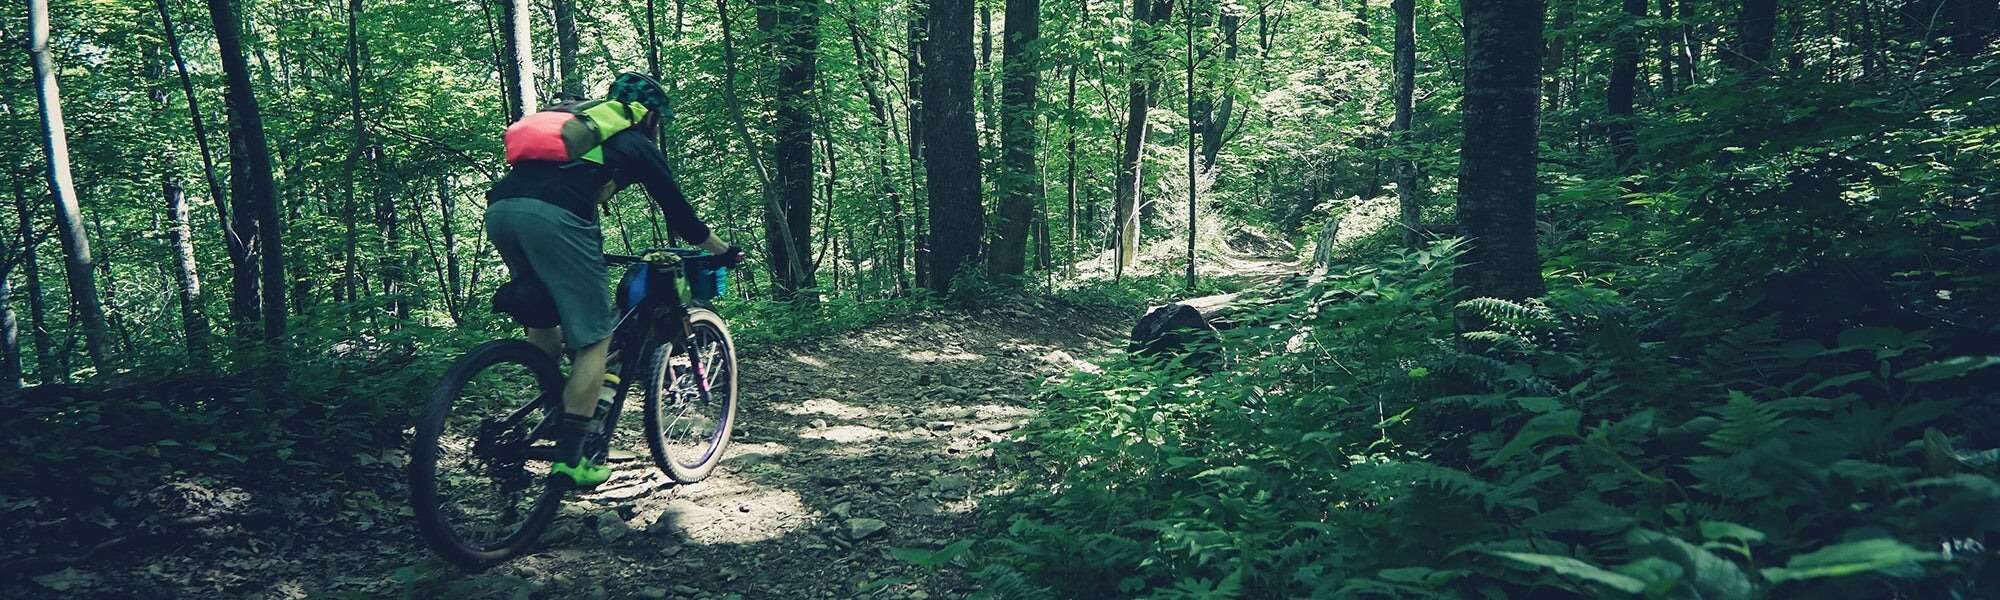 Matt Acker shown from behind rides his mountain bike on a wooded forest trail